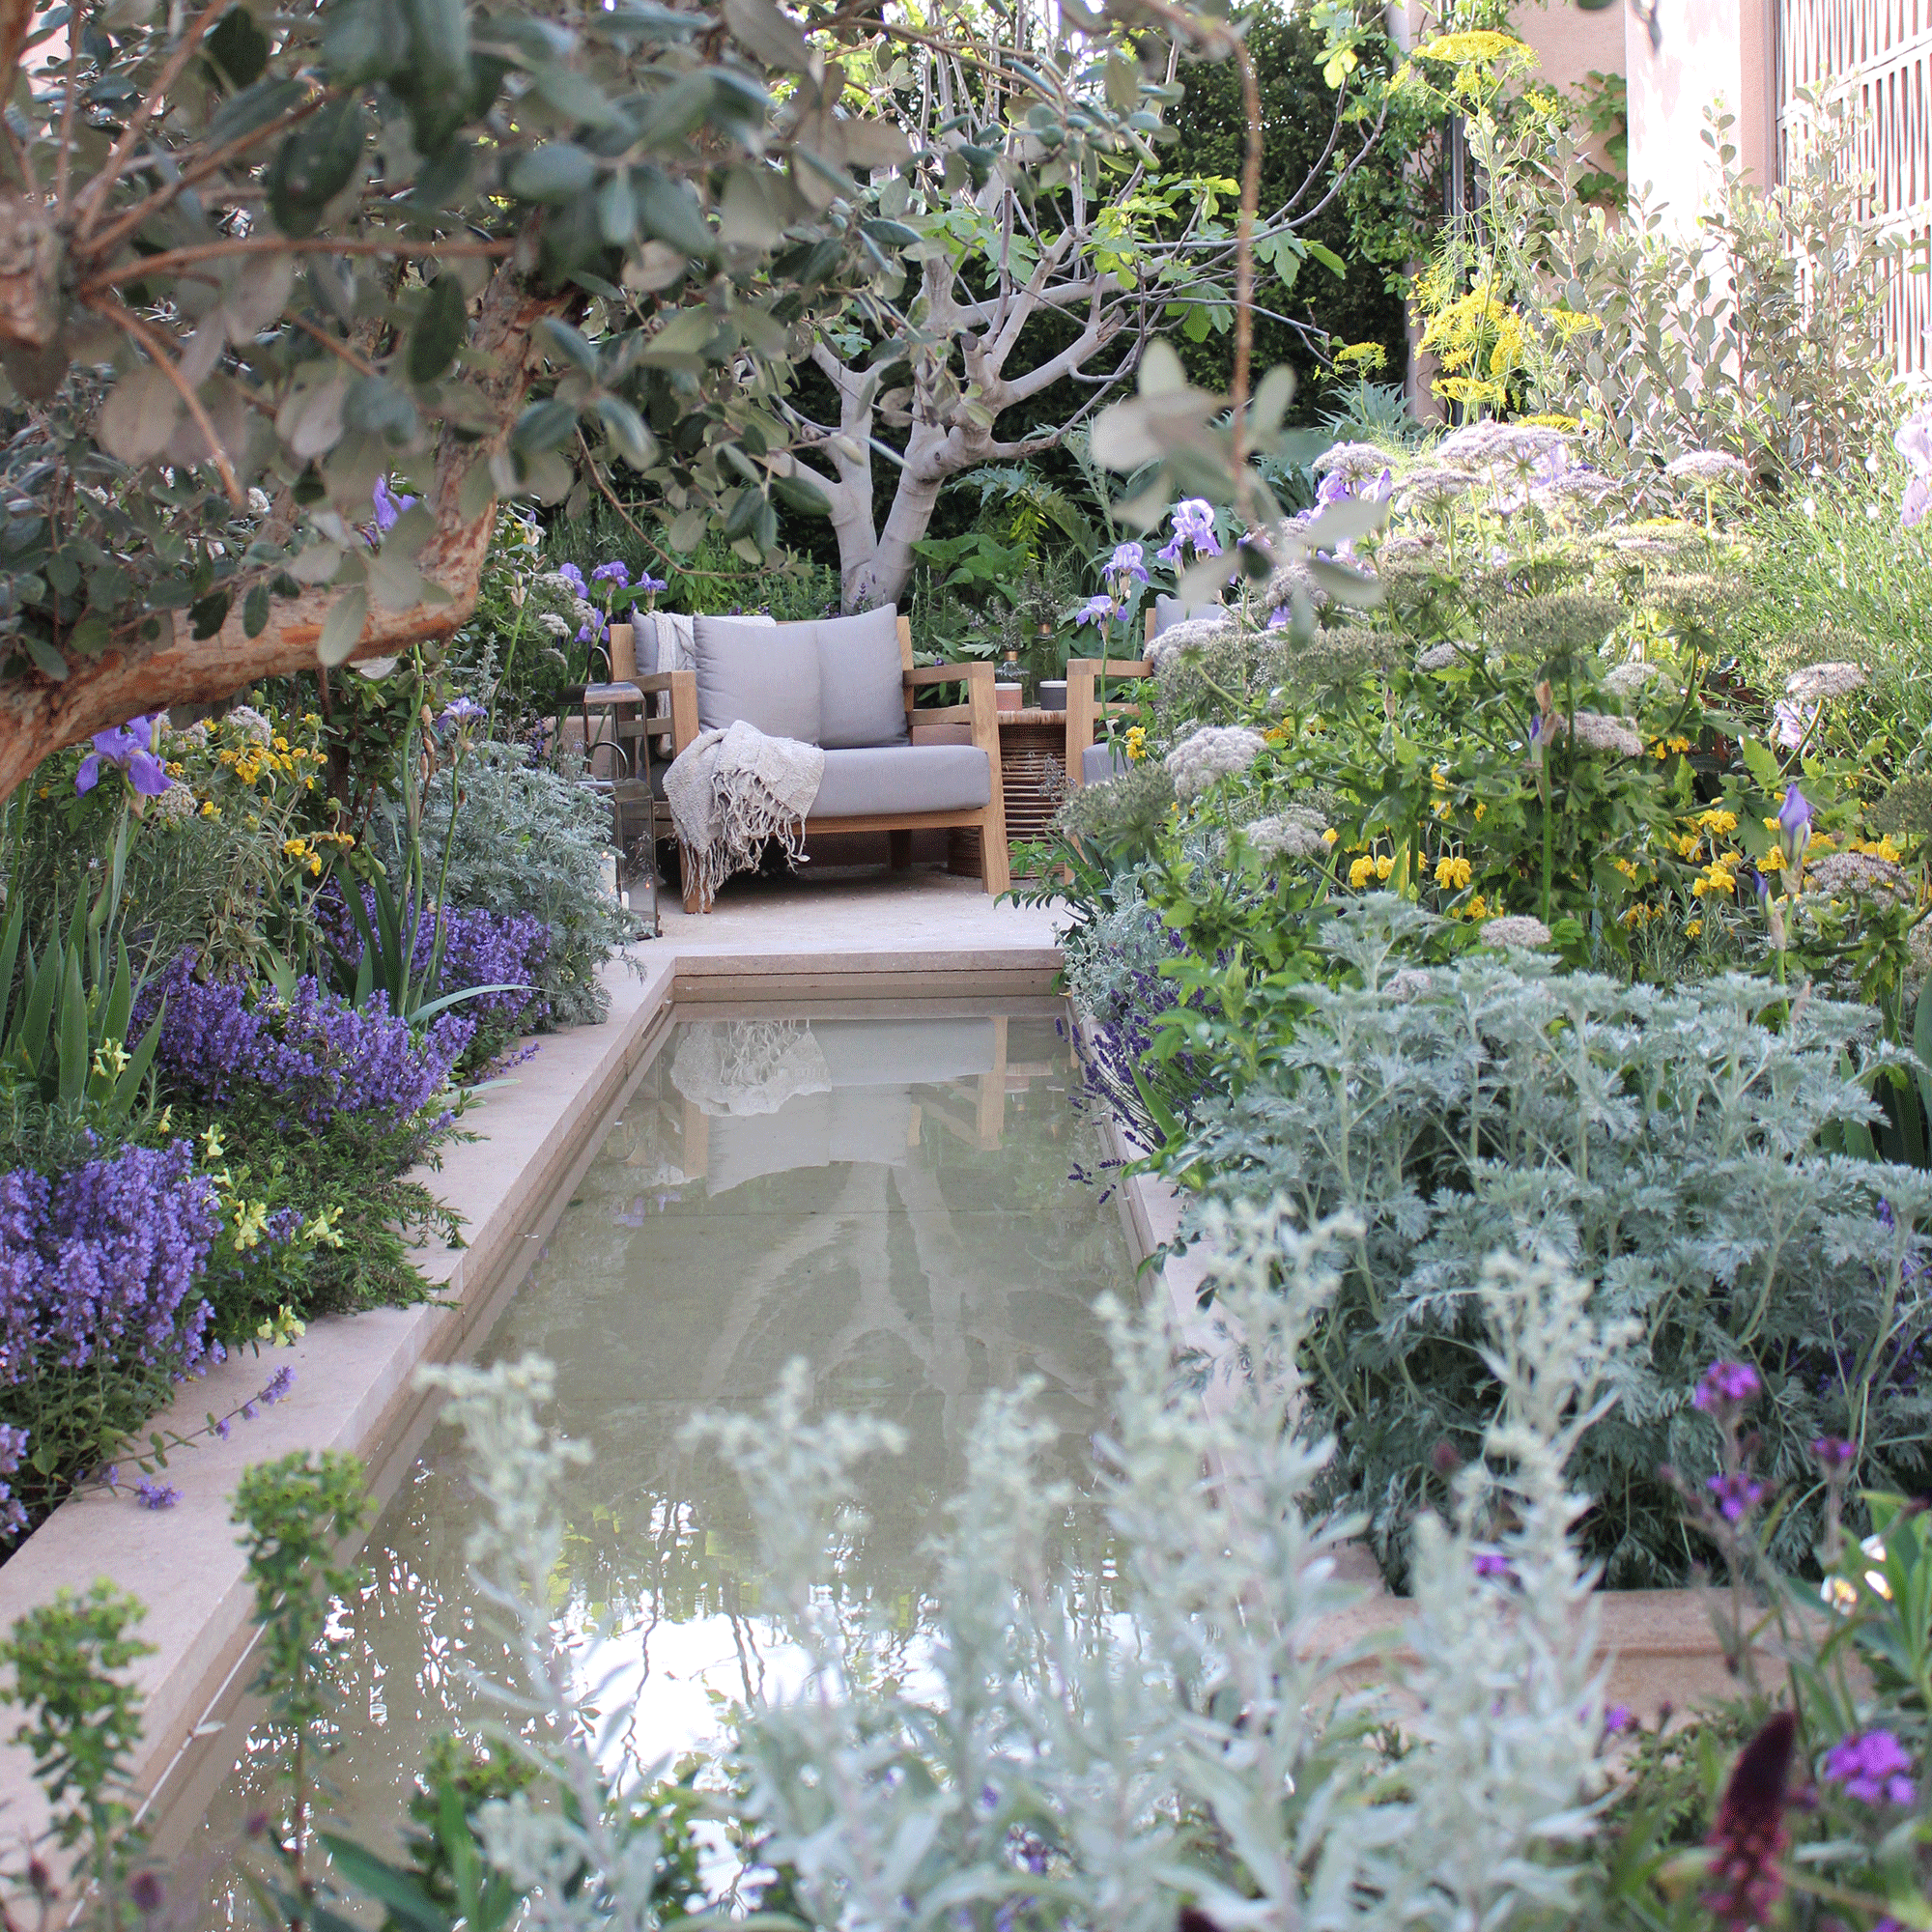 Small garden with long water feature and chair